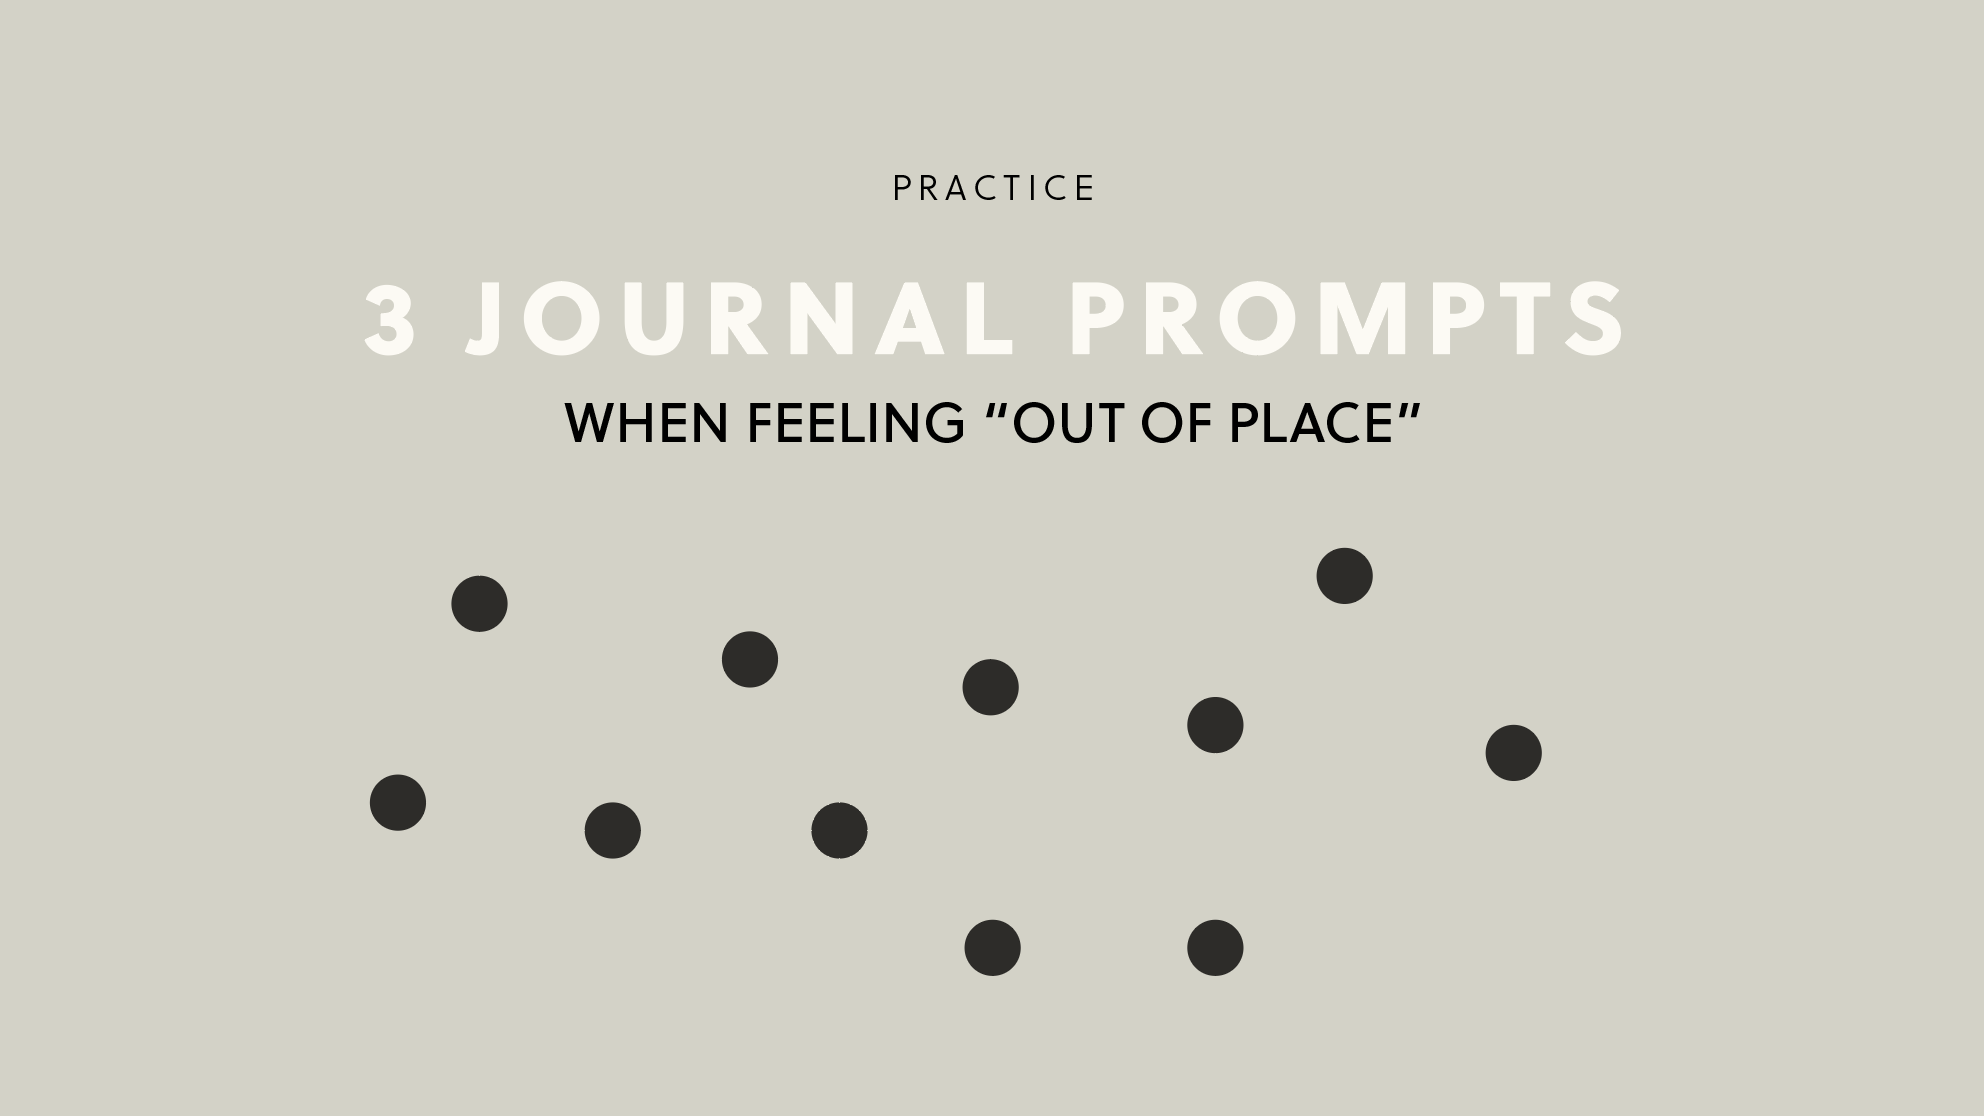 Journal Practice - 3 prompts when feeling out of place